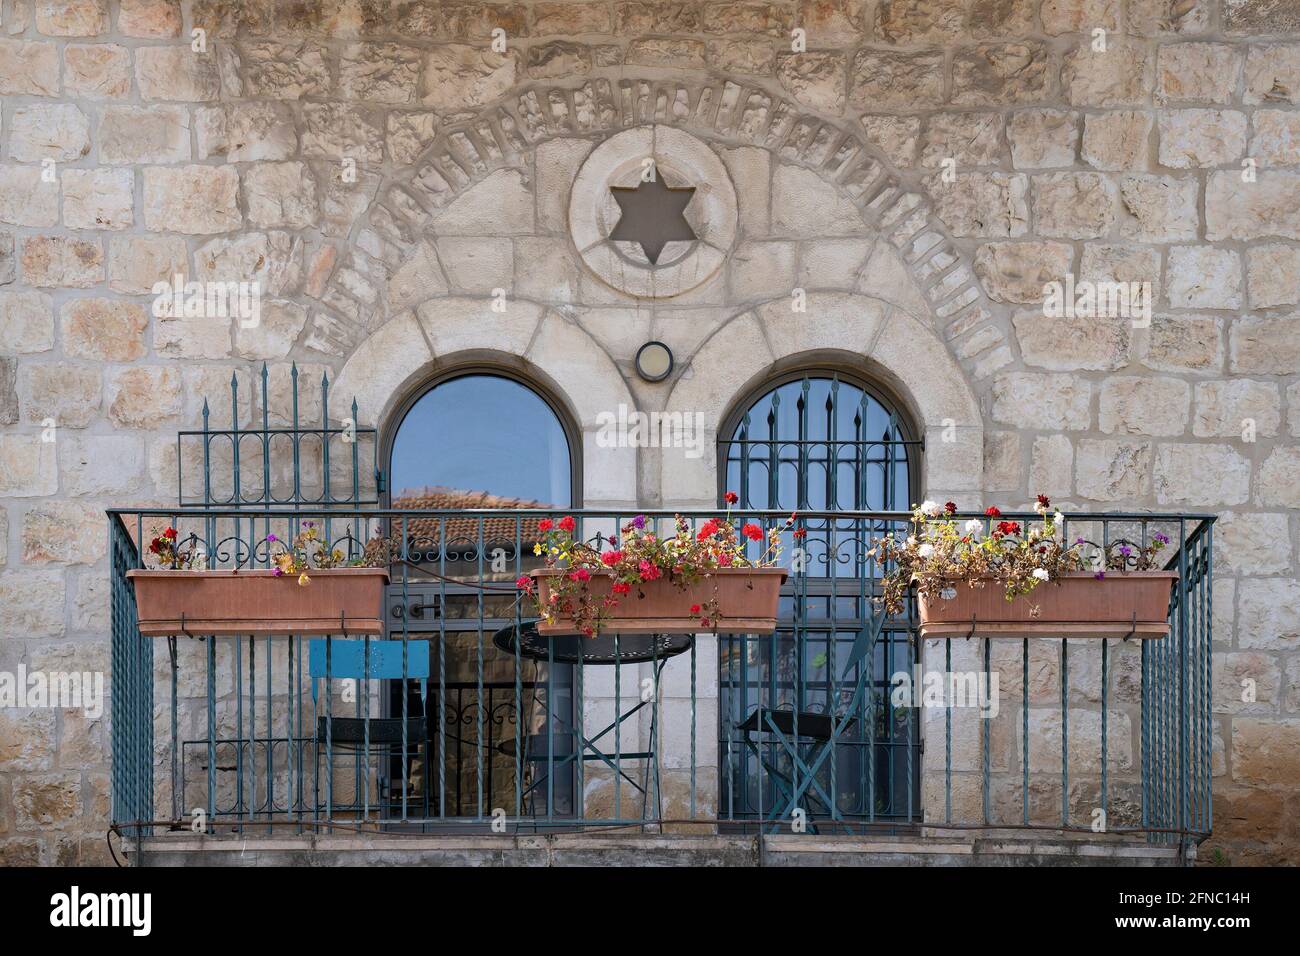 A typical balcony in the jewish houses of old jerusalem, with arched doors, decorated with a star of david. Stock Photo